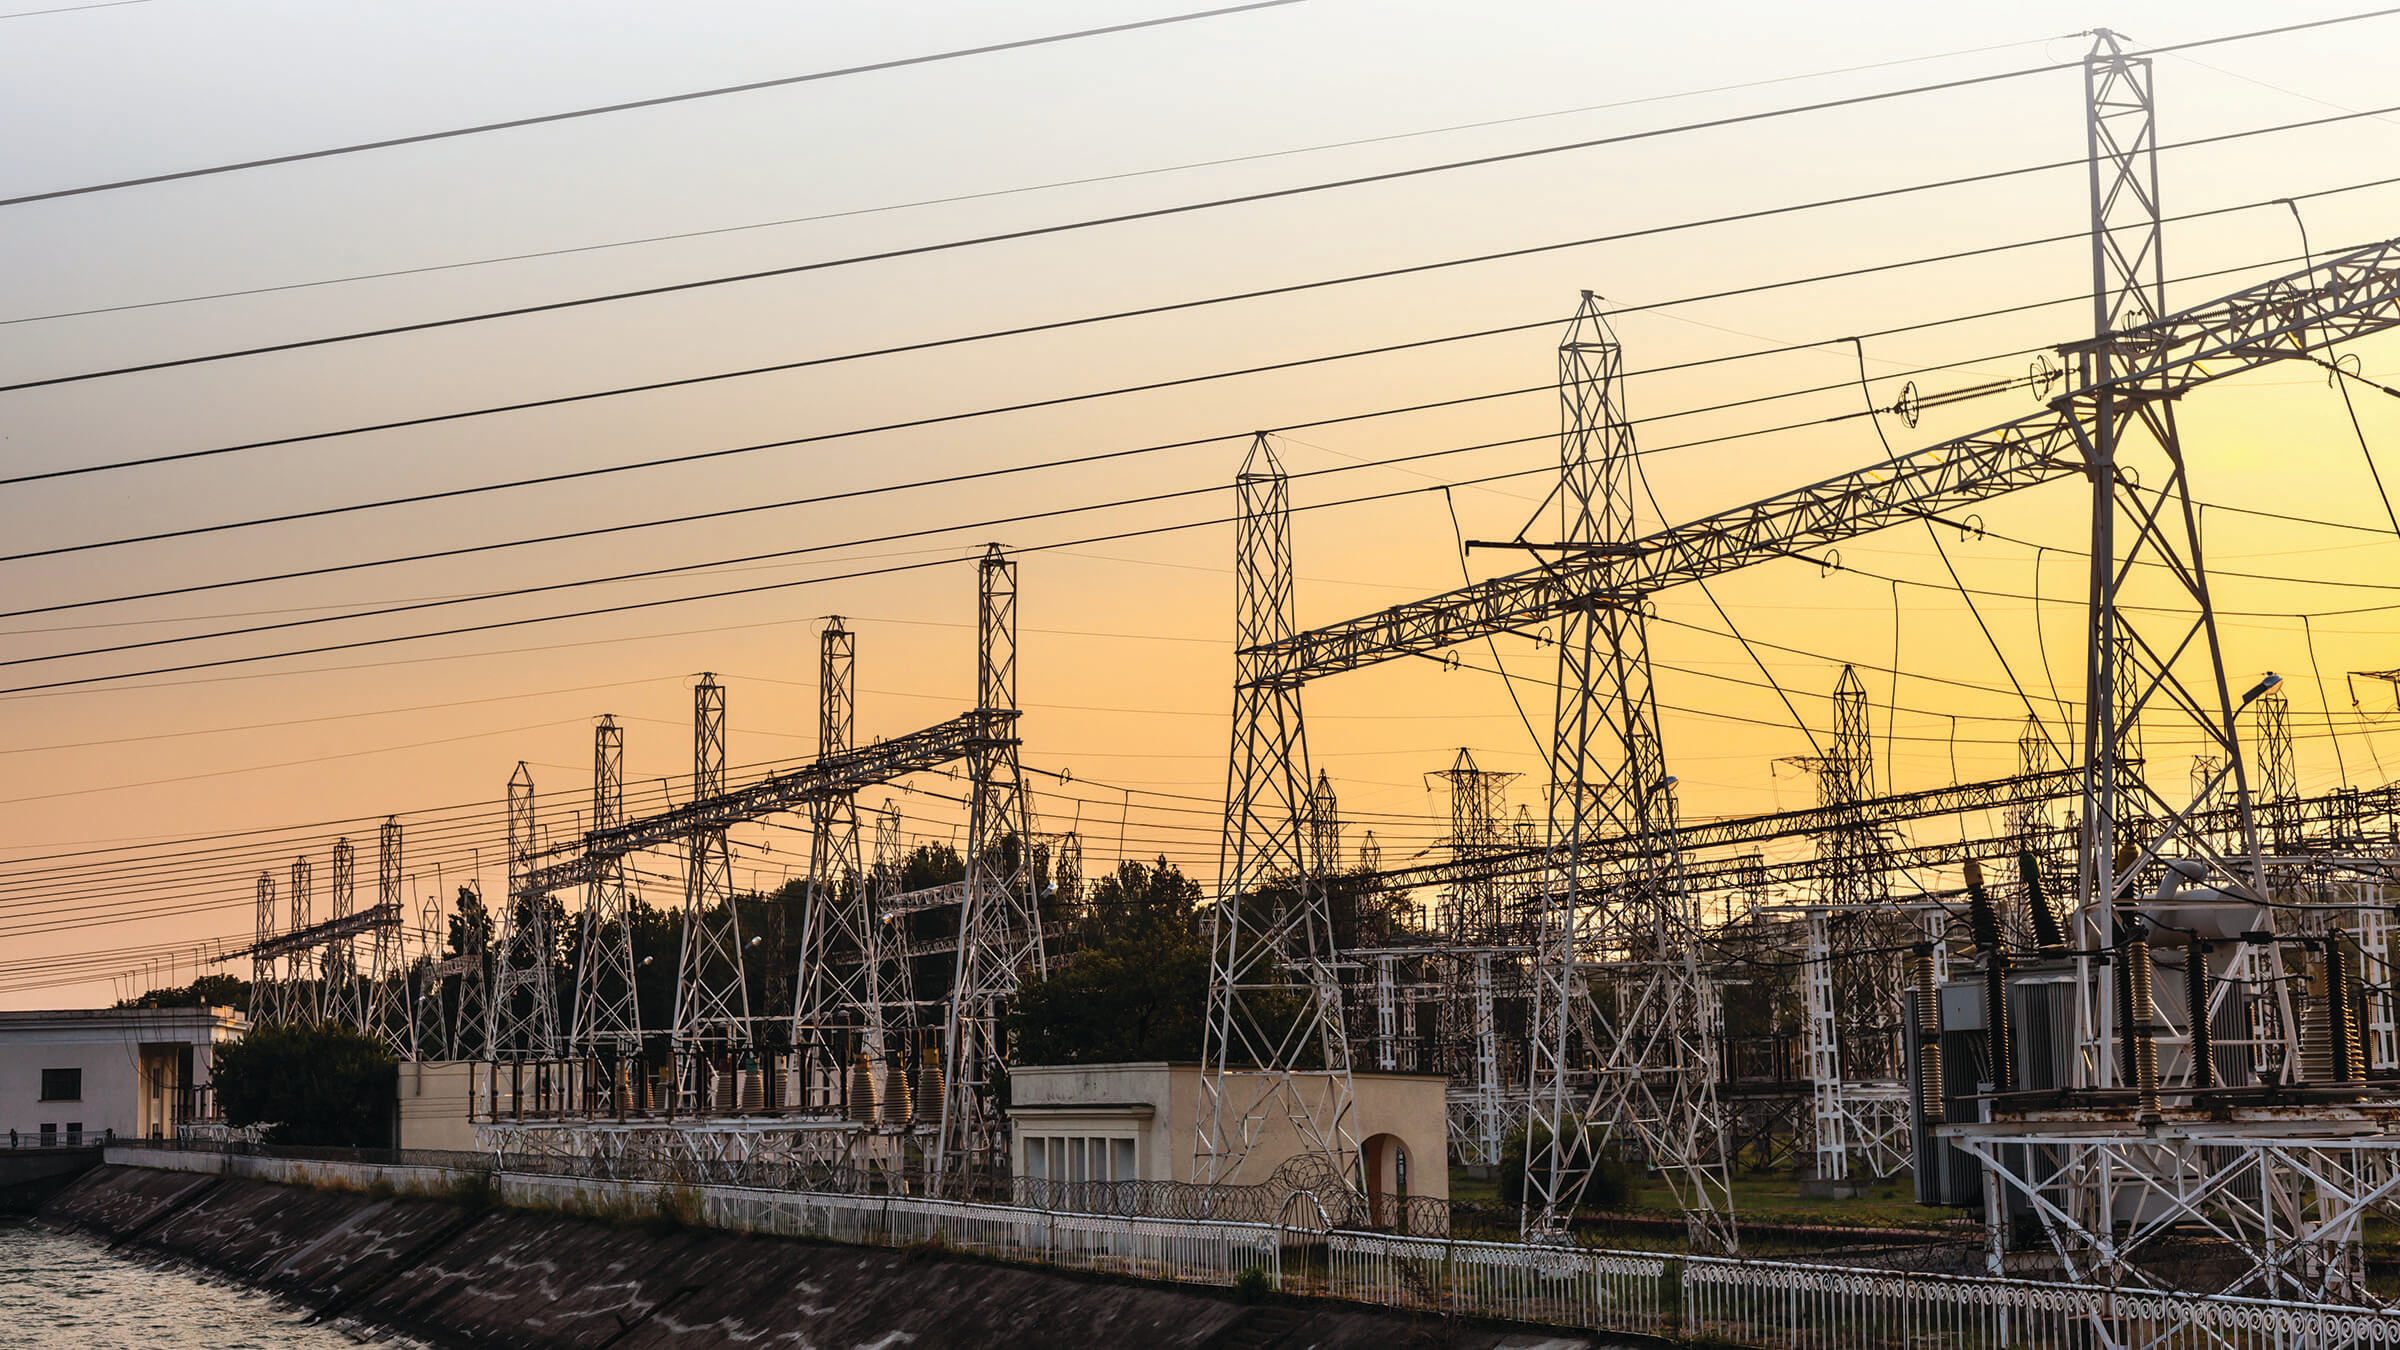 An electrical utility site at dusk reprensenting Senstar's ability to protect critical infrastructure